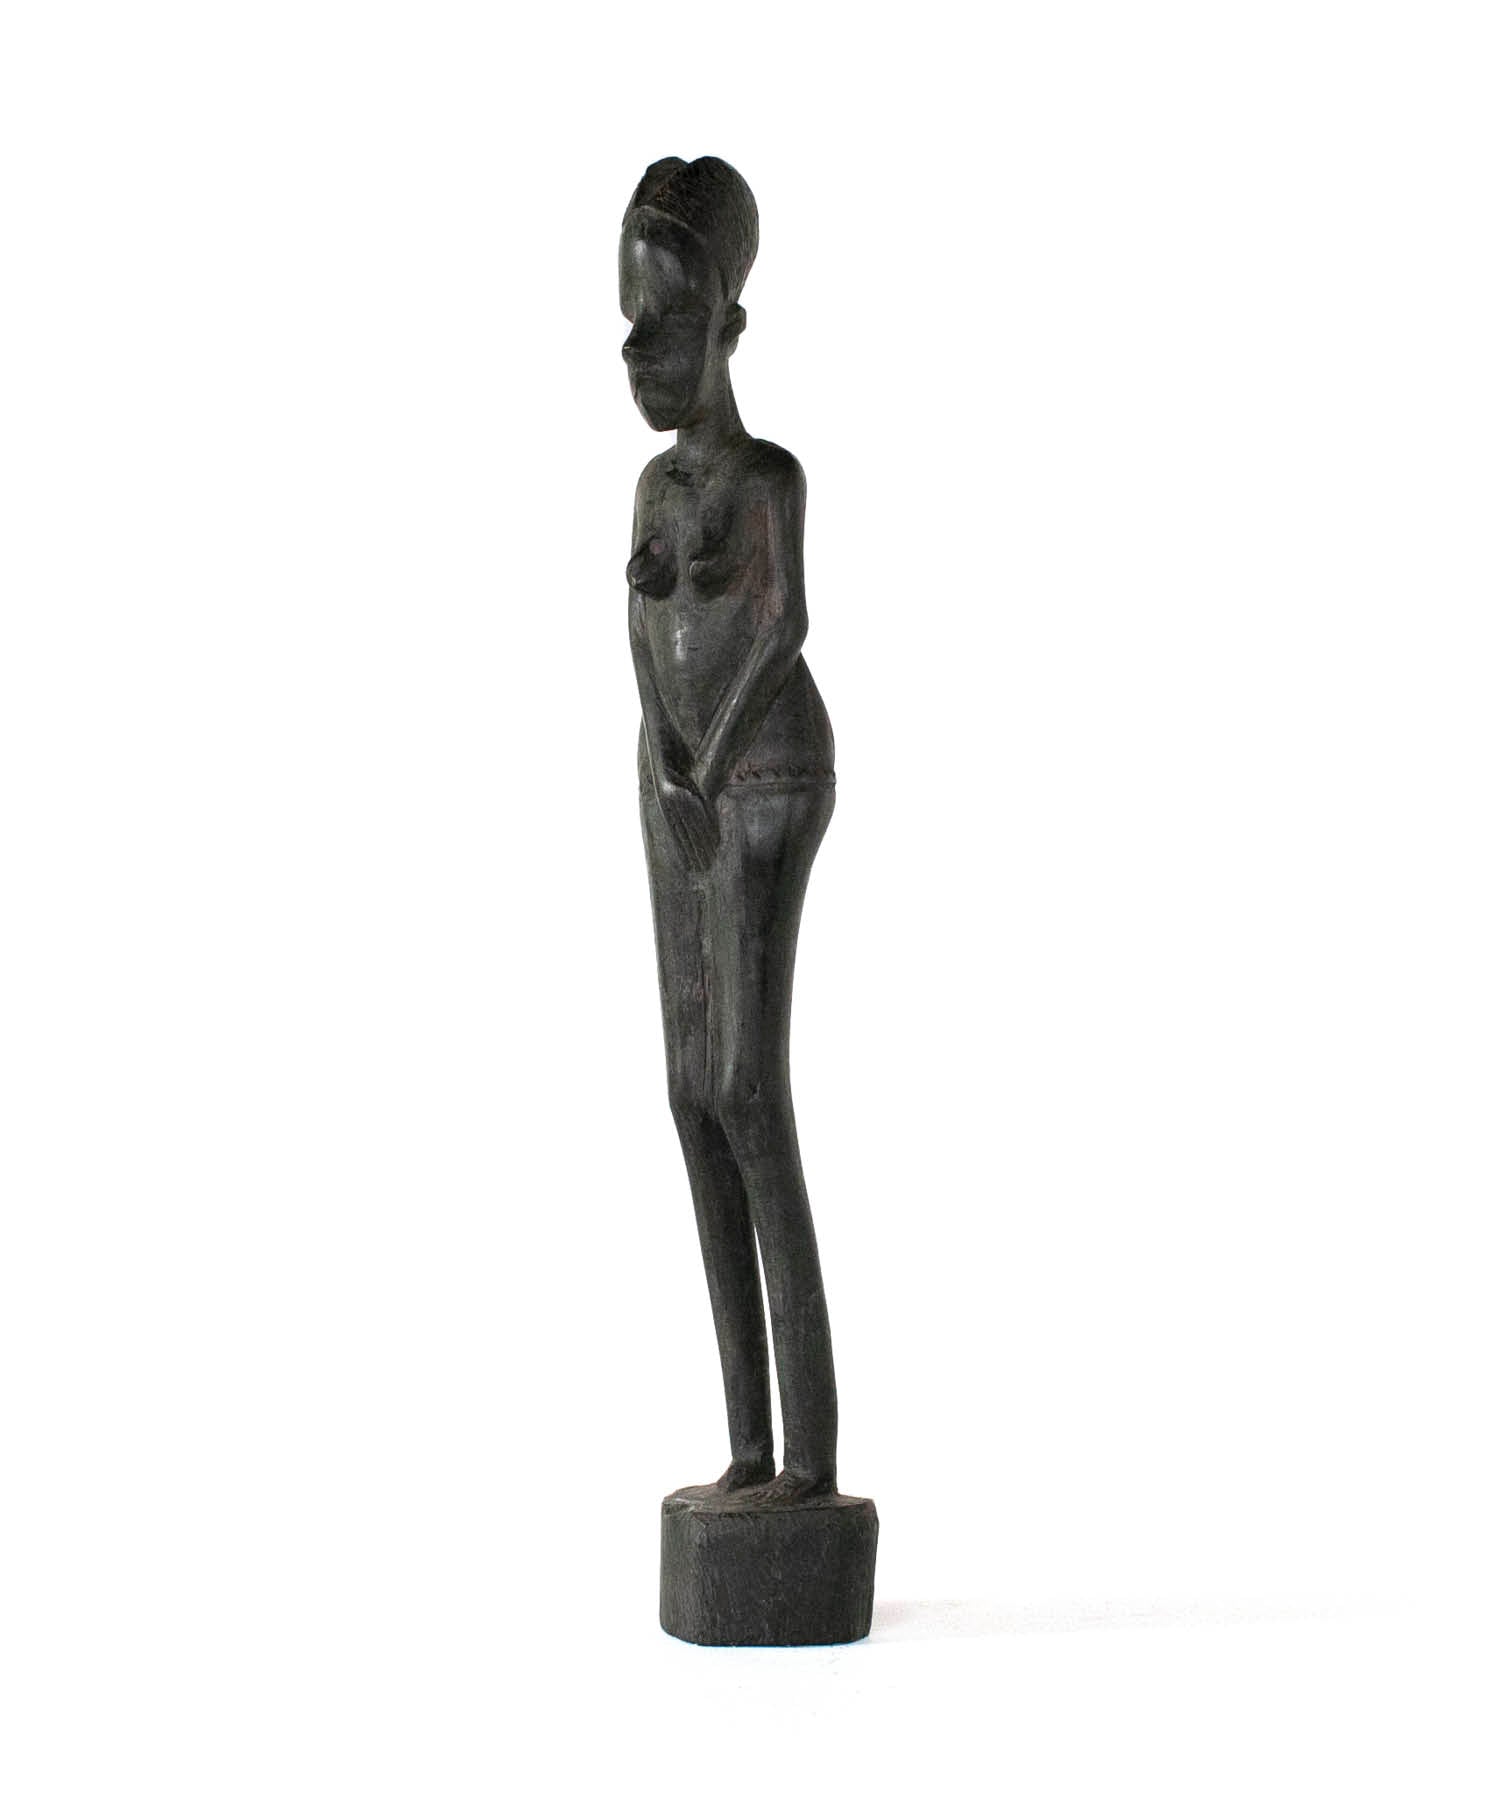 Vintage Object : African Wooden Doll | LIKE THIS SHOP